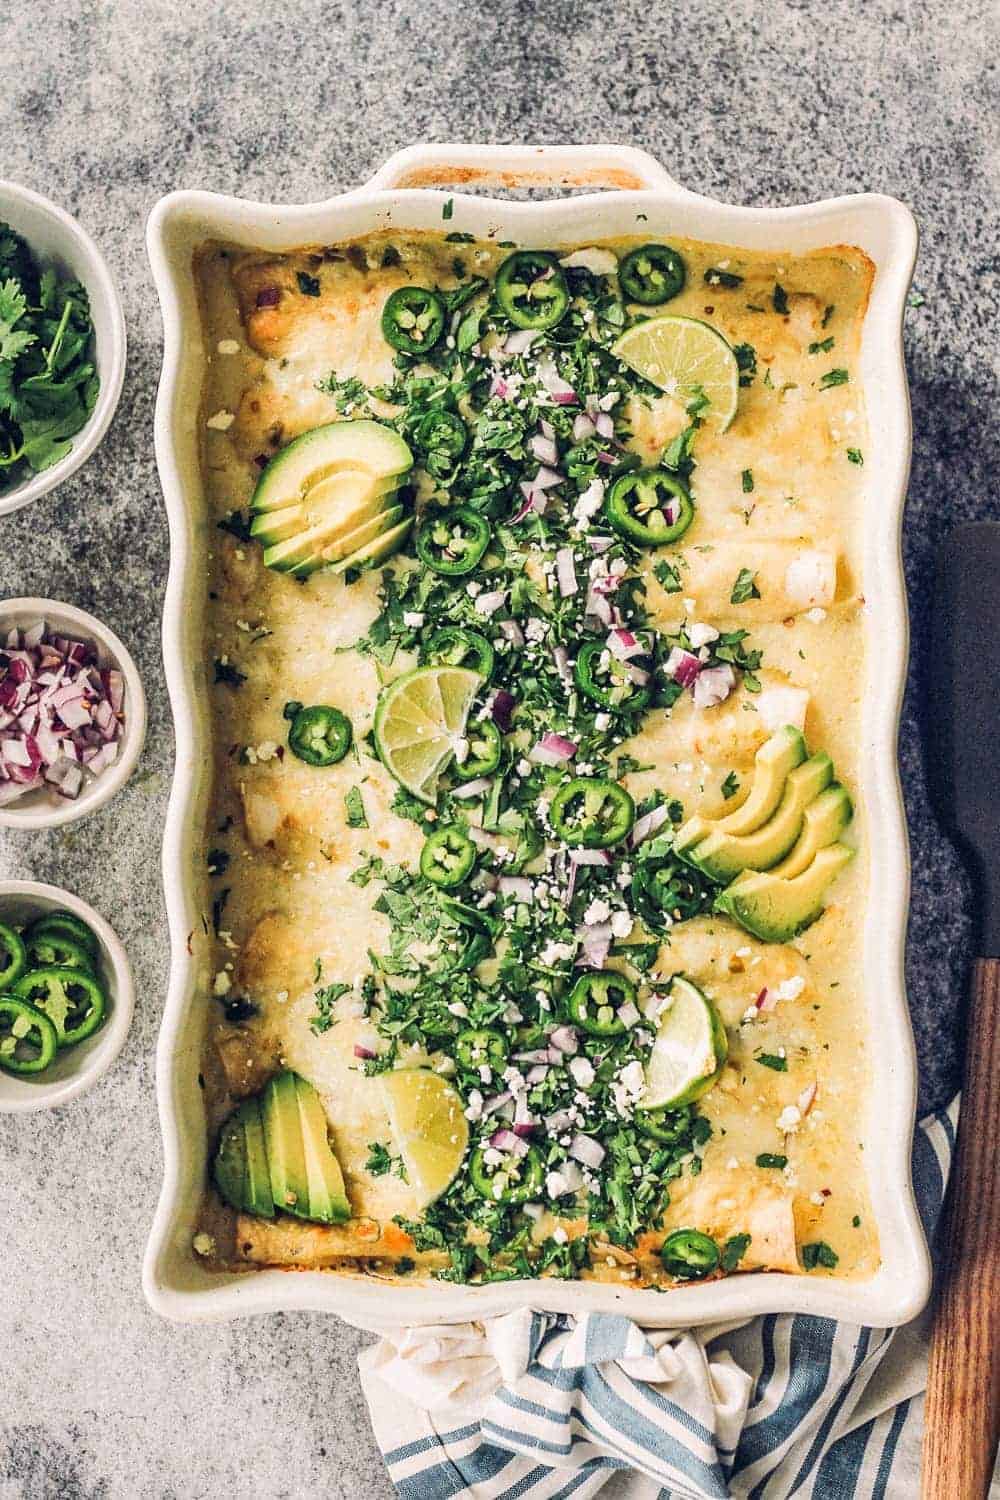 Baked Sour Cream Chicken Enchiladas topped with garnishes